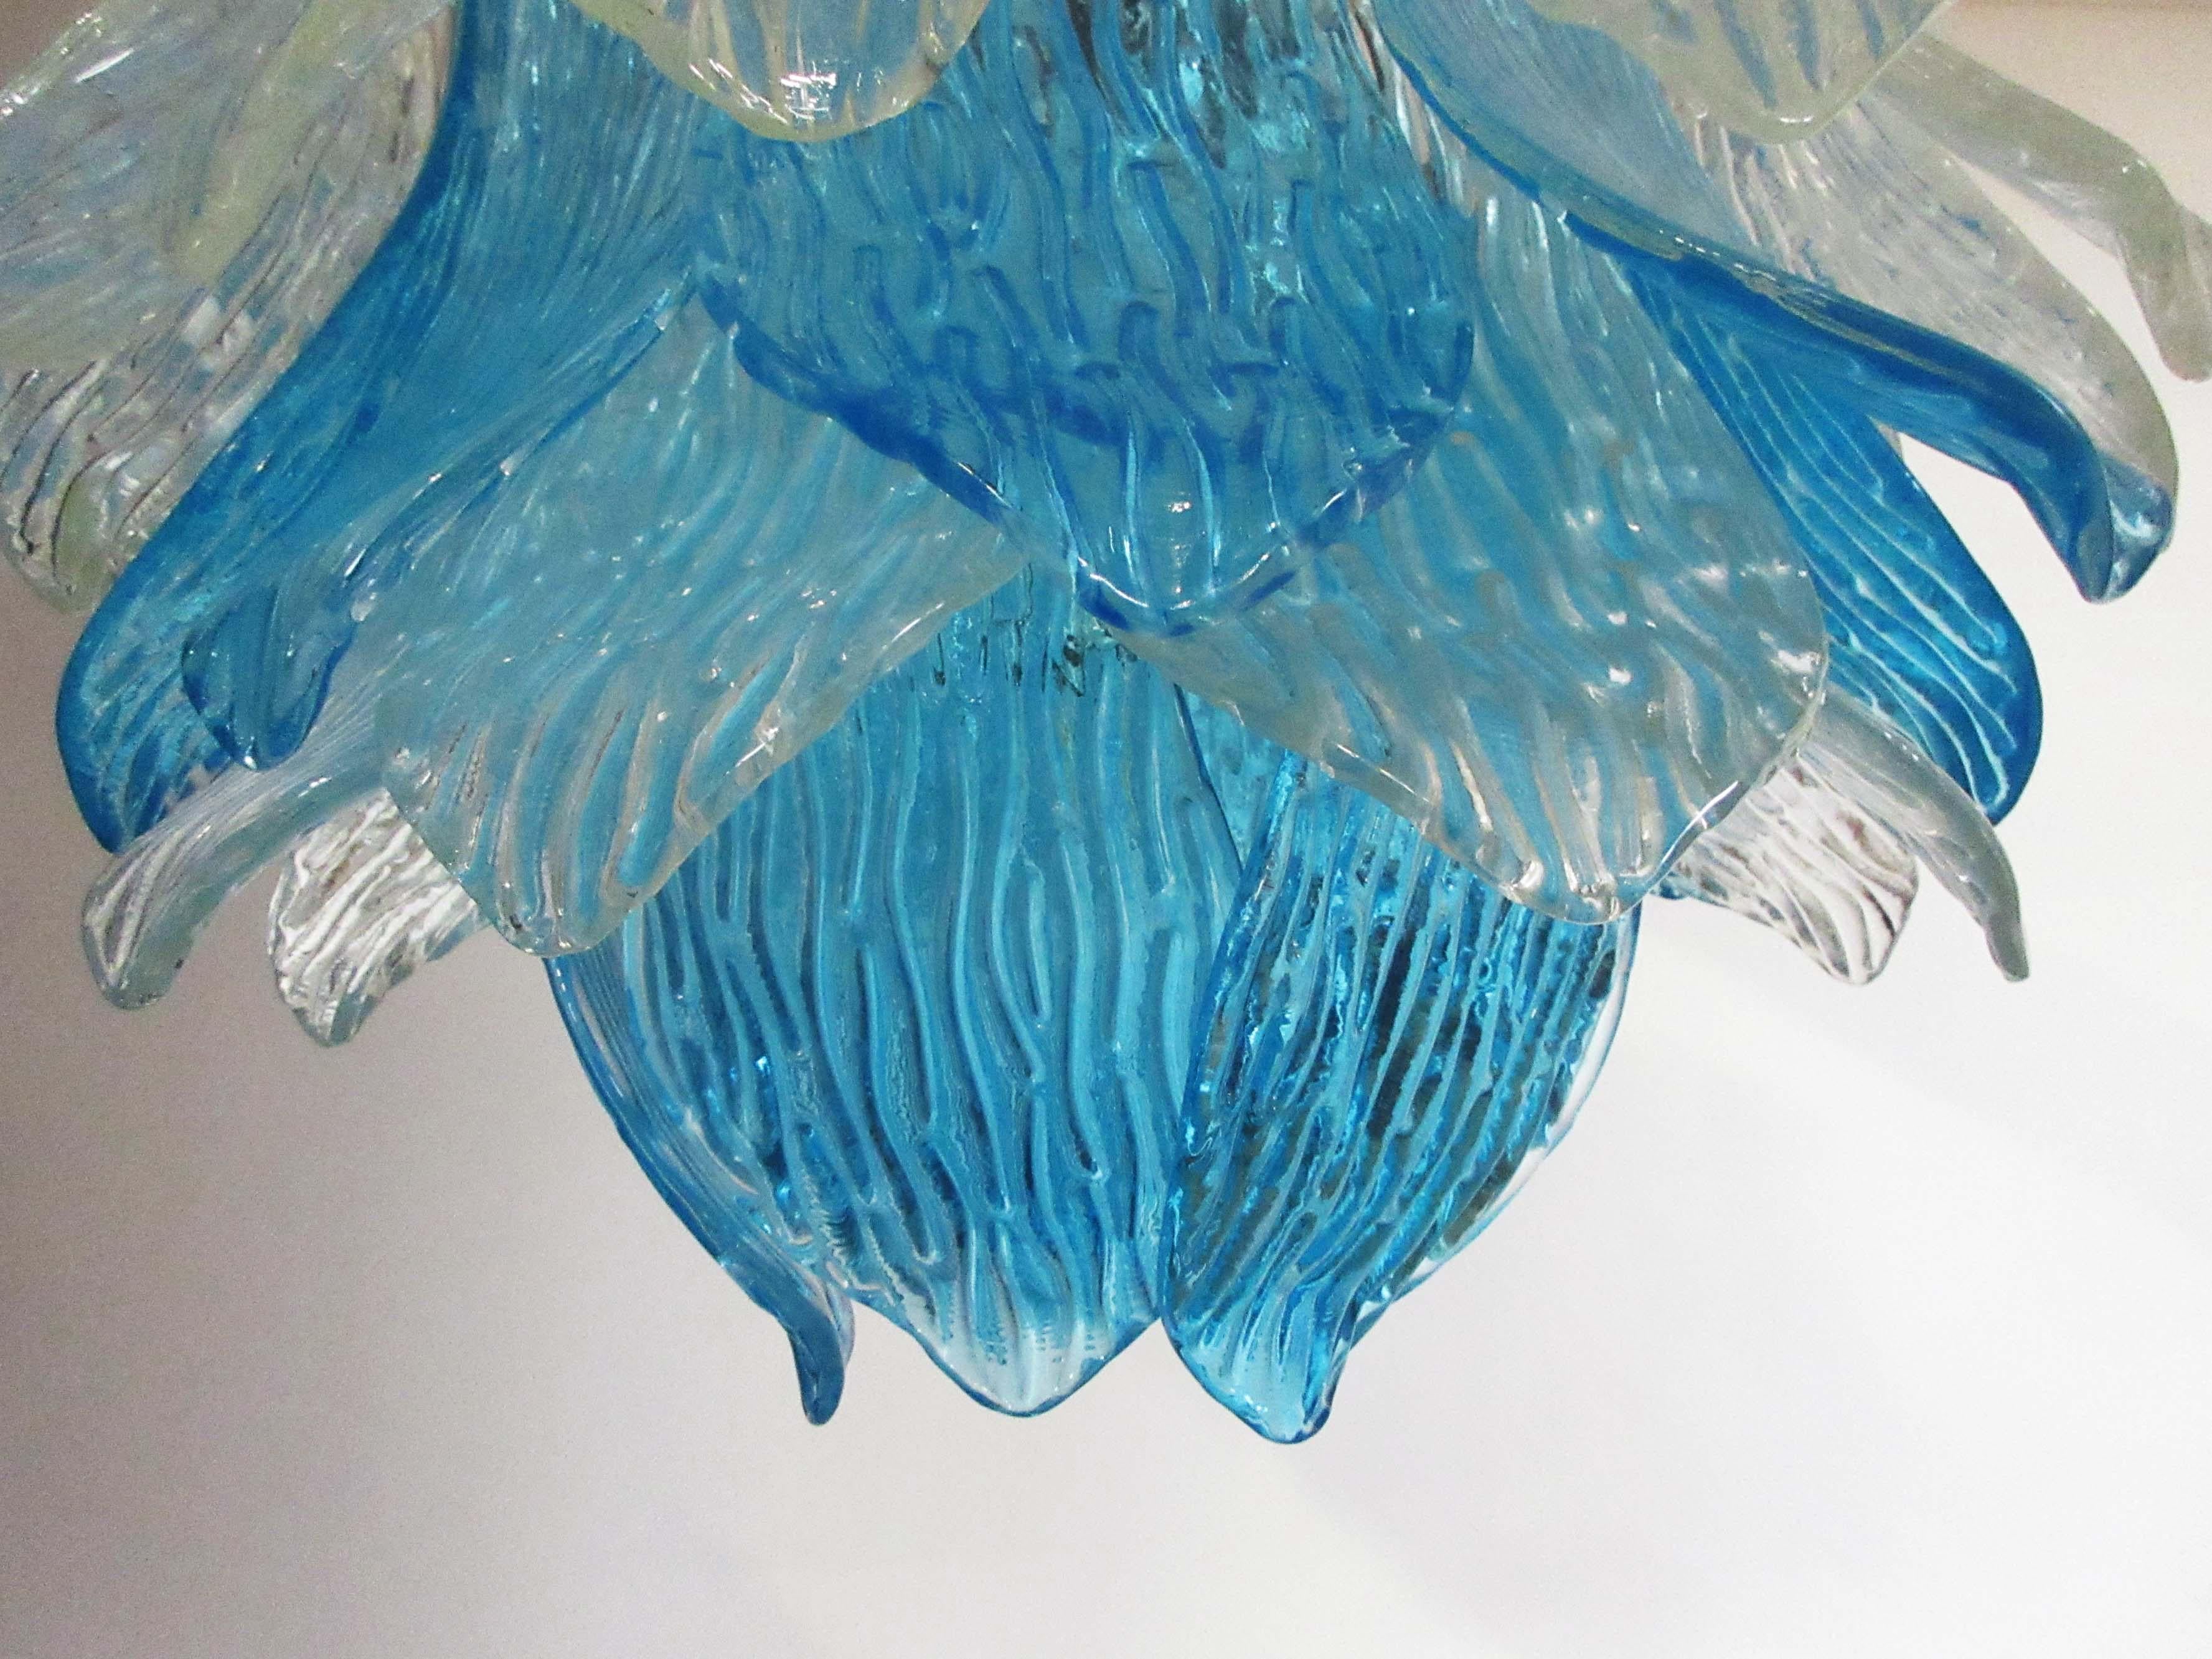 Metal Pair of Italian Murano Chandeliers Blue and Transparent Leaves, Murano, 1980s